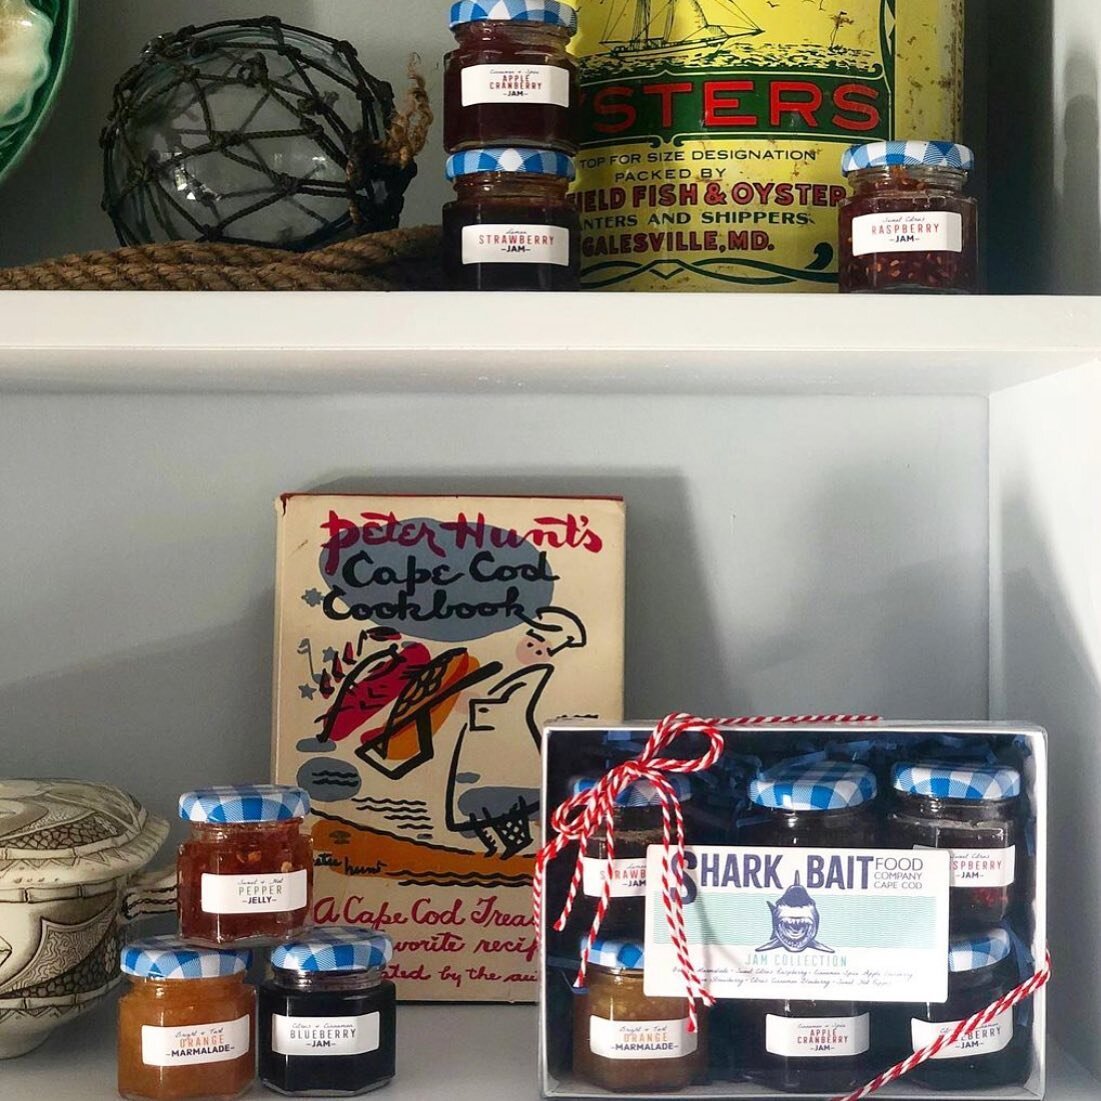 @sharkbaitfoodco will be at the shop on Saturday from 11-3 ❤️ They have amazing locally made jams which make perfect last minute holiday gifts! #capecod